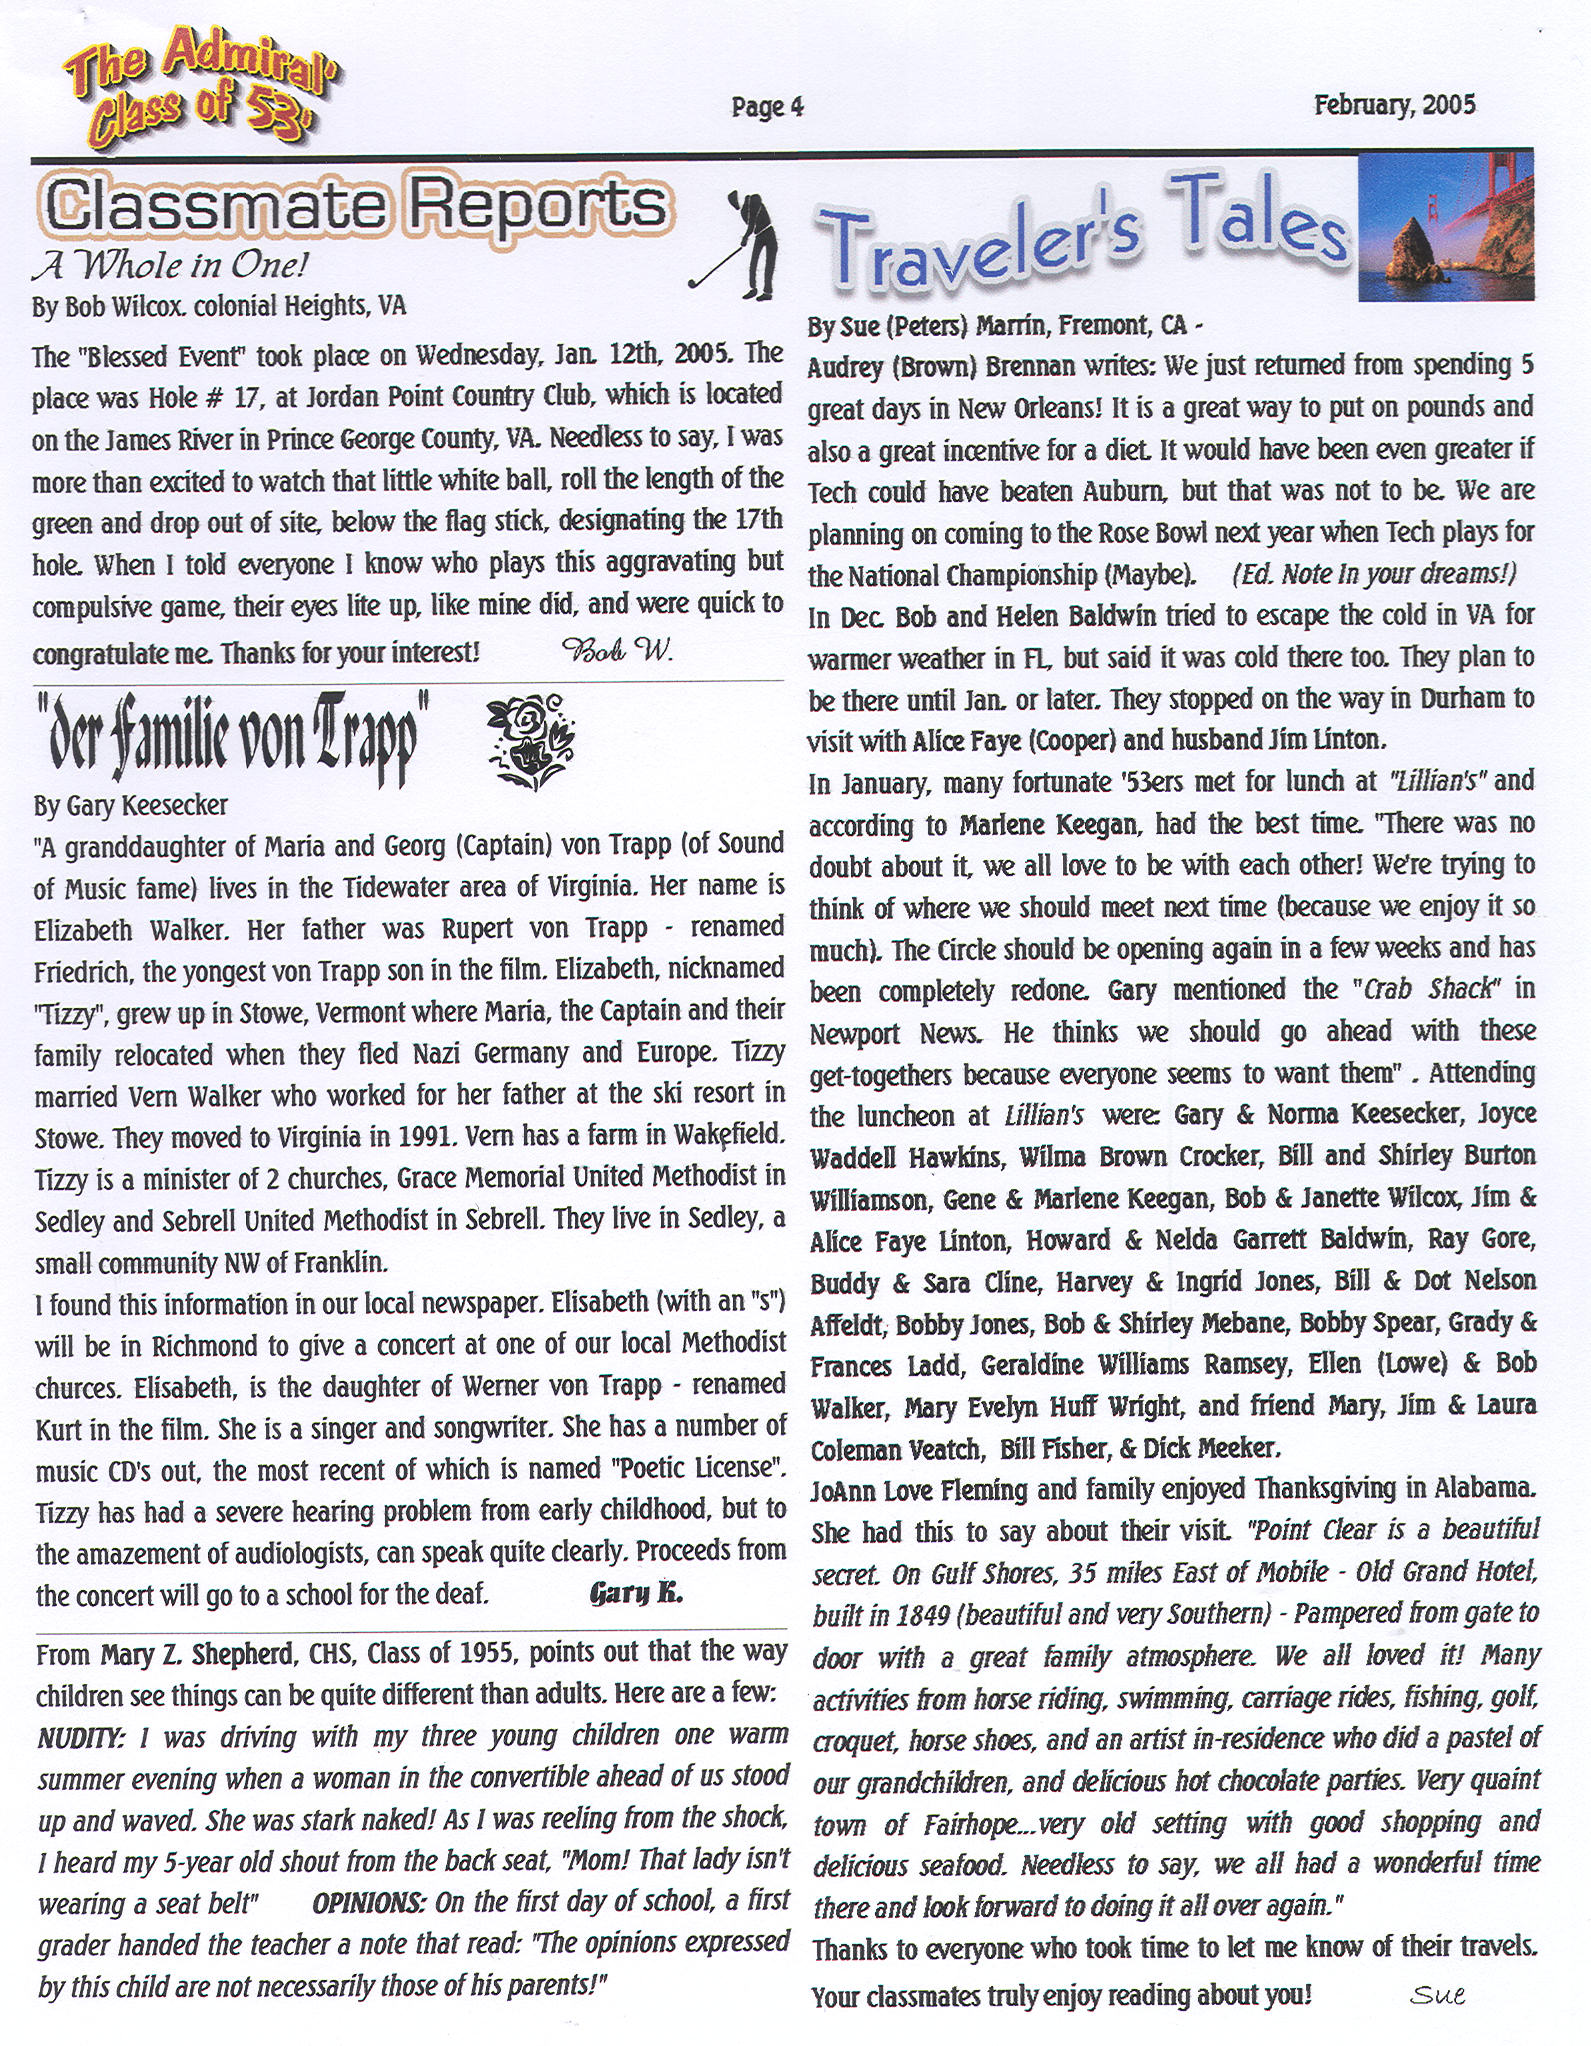 The Admiral - Feb. 2005 - pg. 4